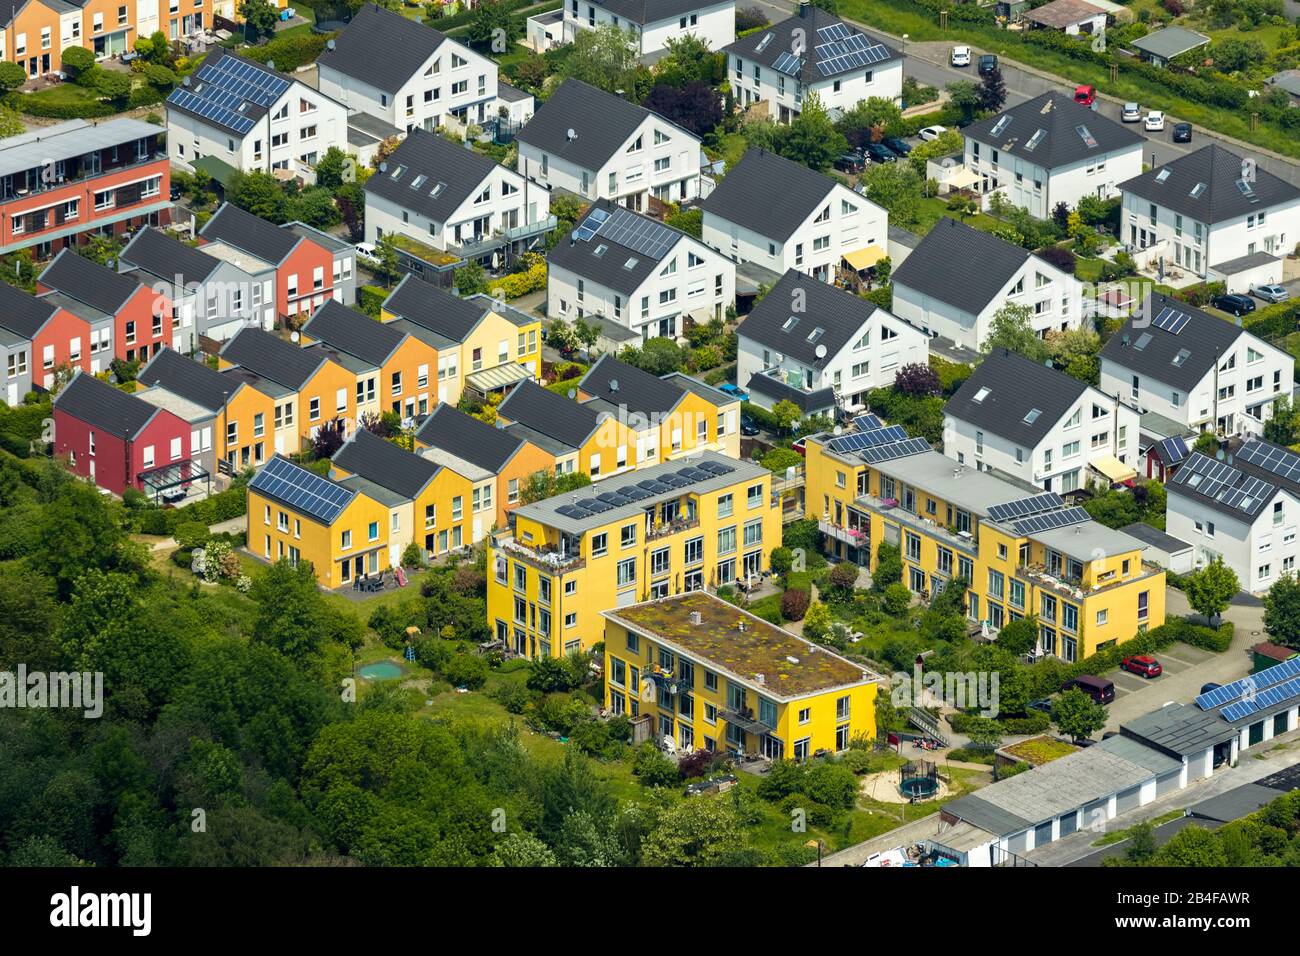 Aerial view of the residential area Trempniapark in Dortmund, single-family dwelling house, semidetached house, Schönau, Dortmund, Ruhr area, North Rhine-Westphalia, Germany Stock Photo